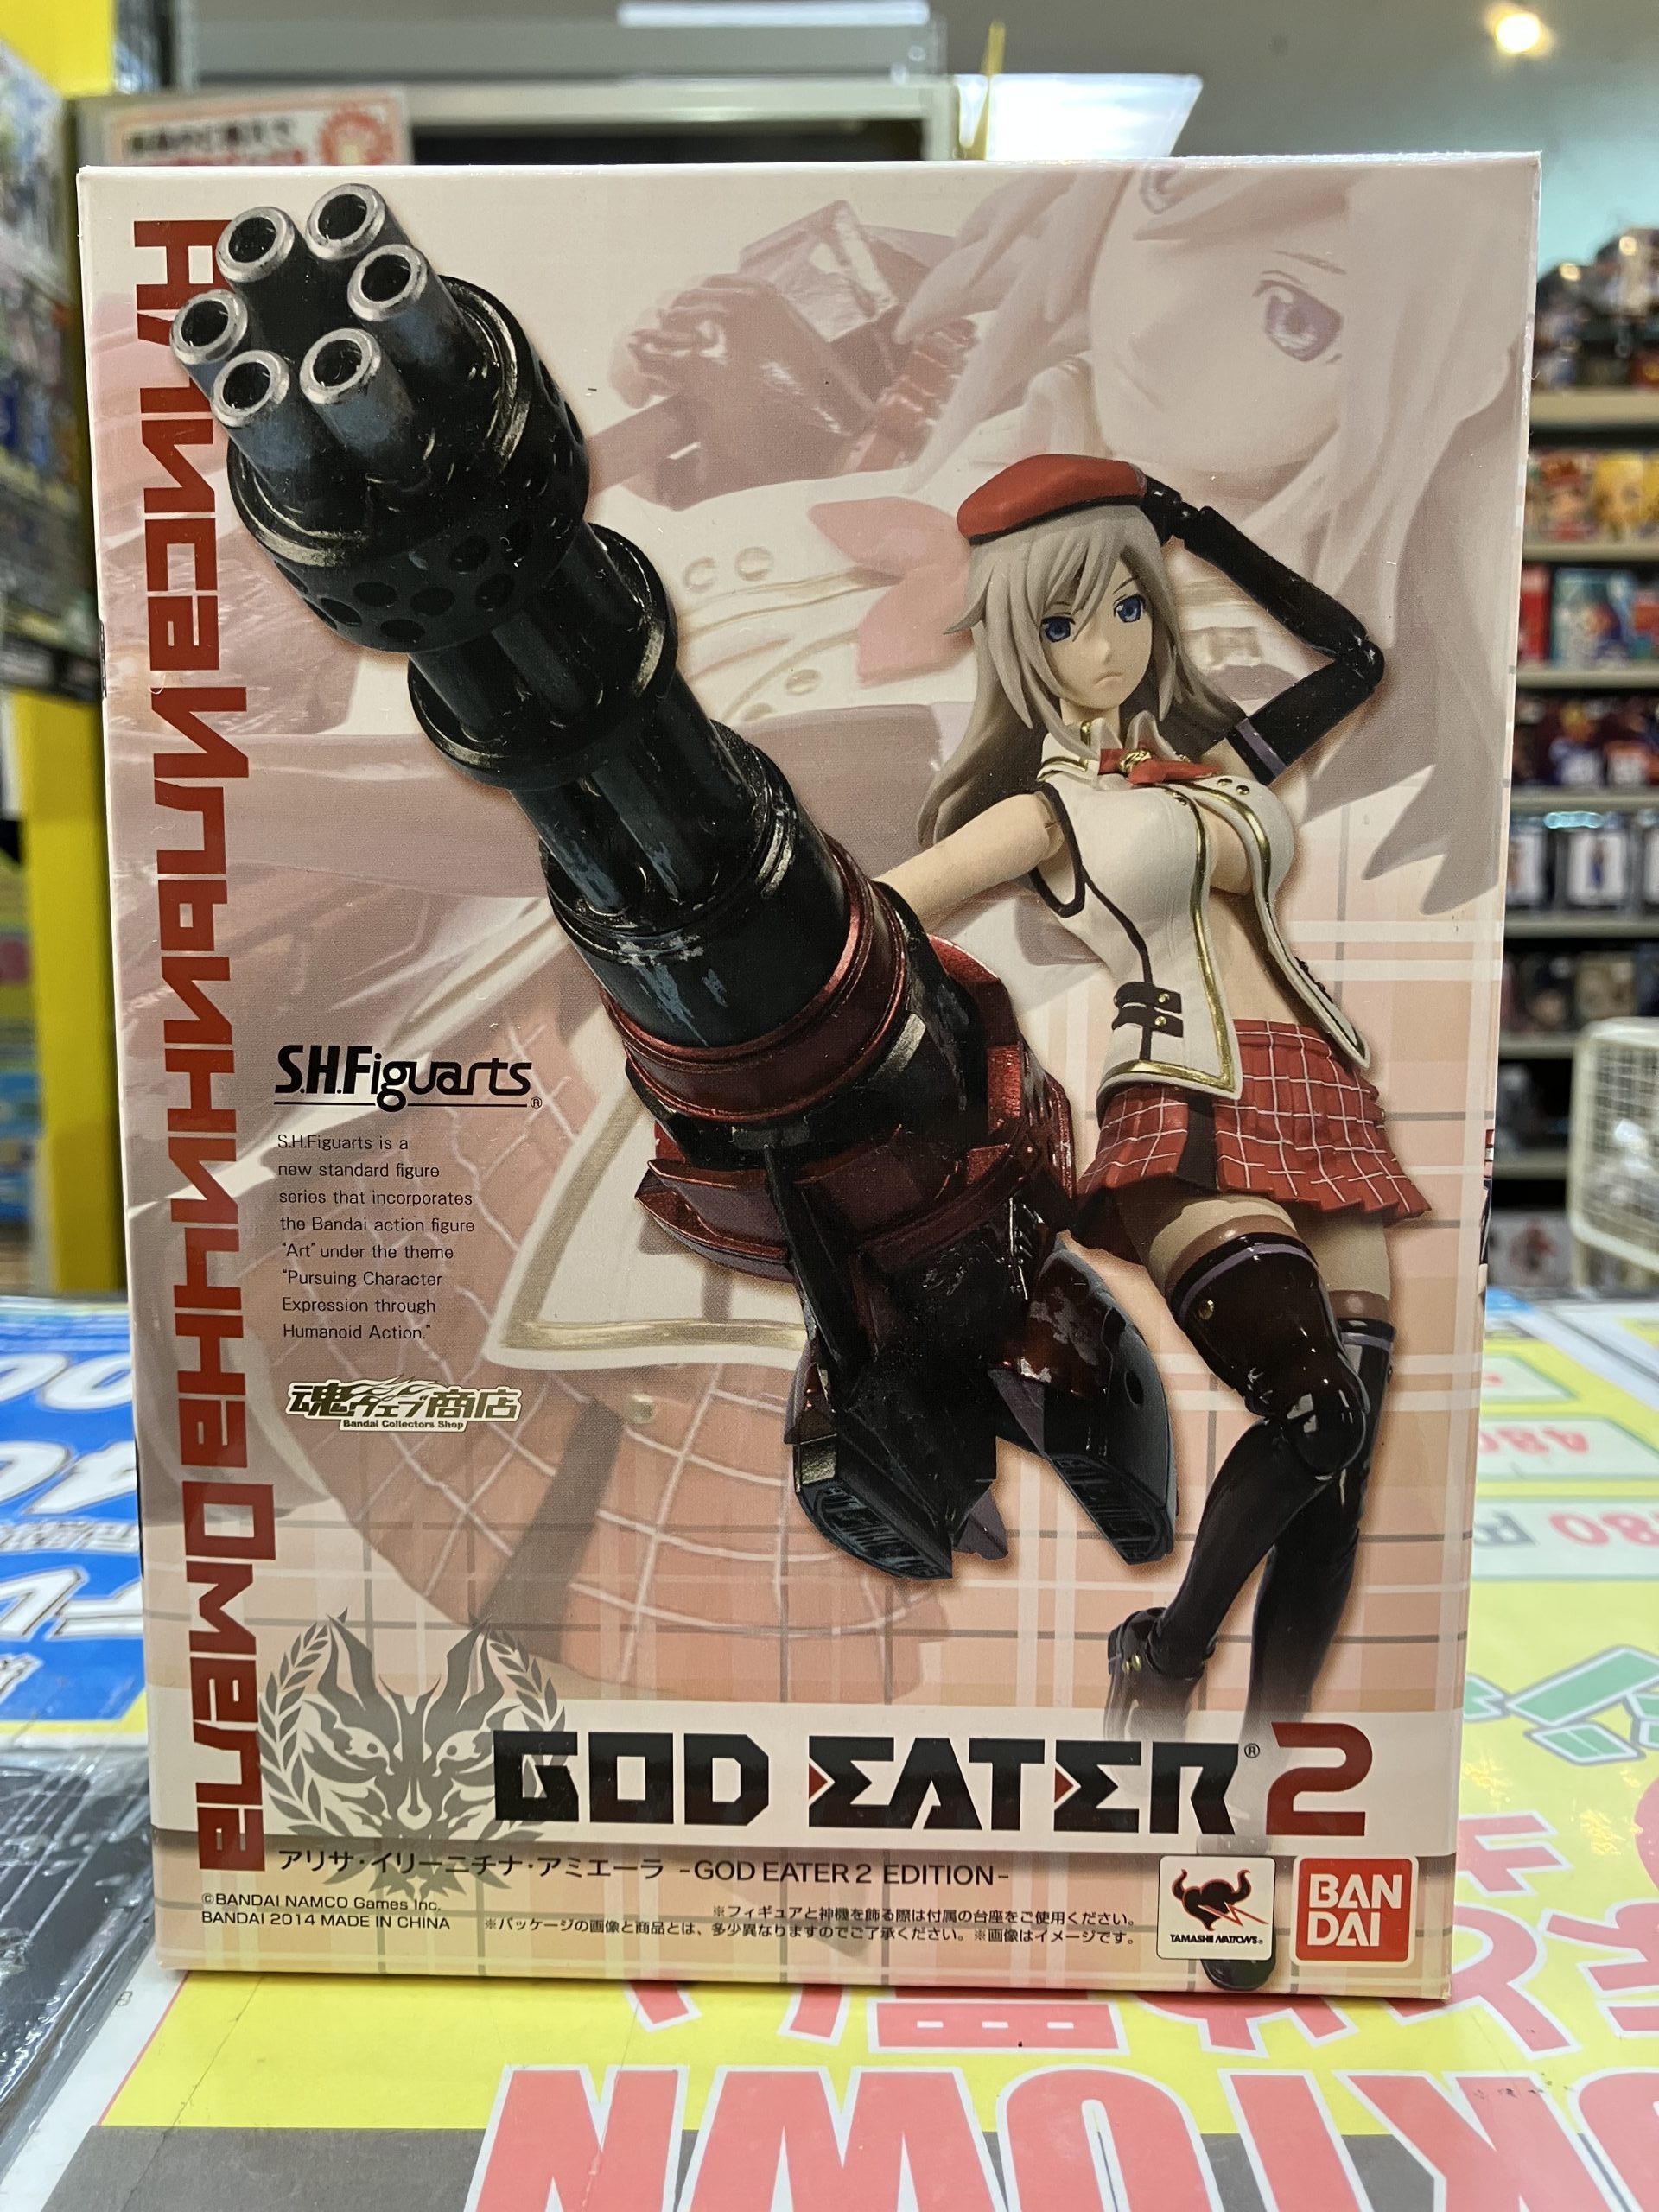 S.H.Figuarts アリサ・イリーニチナ・アミエーラ GOD EATER2 EDTION